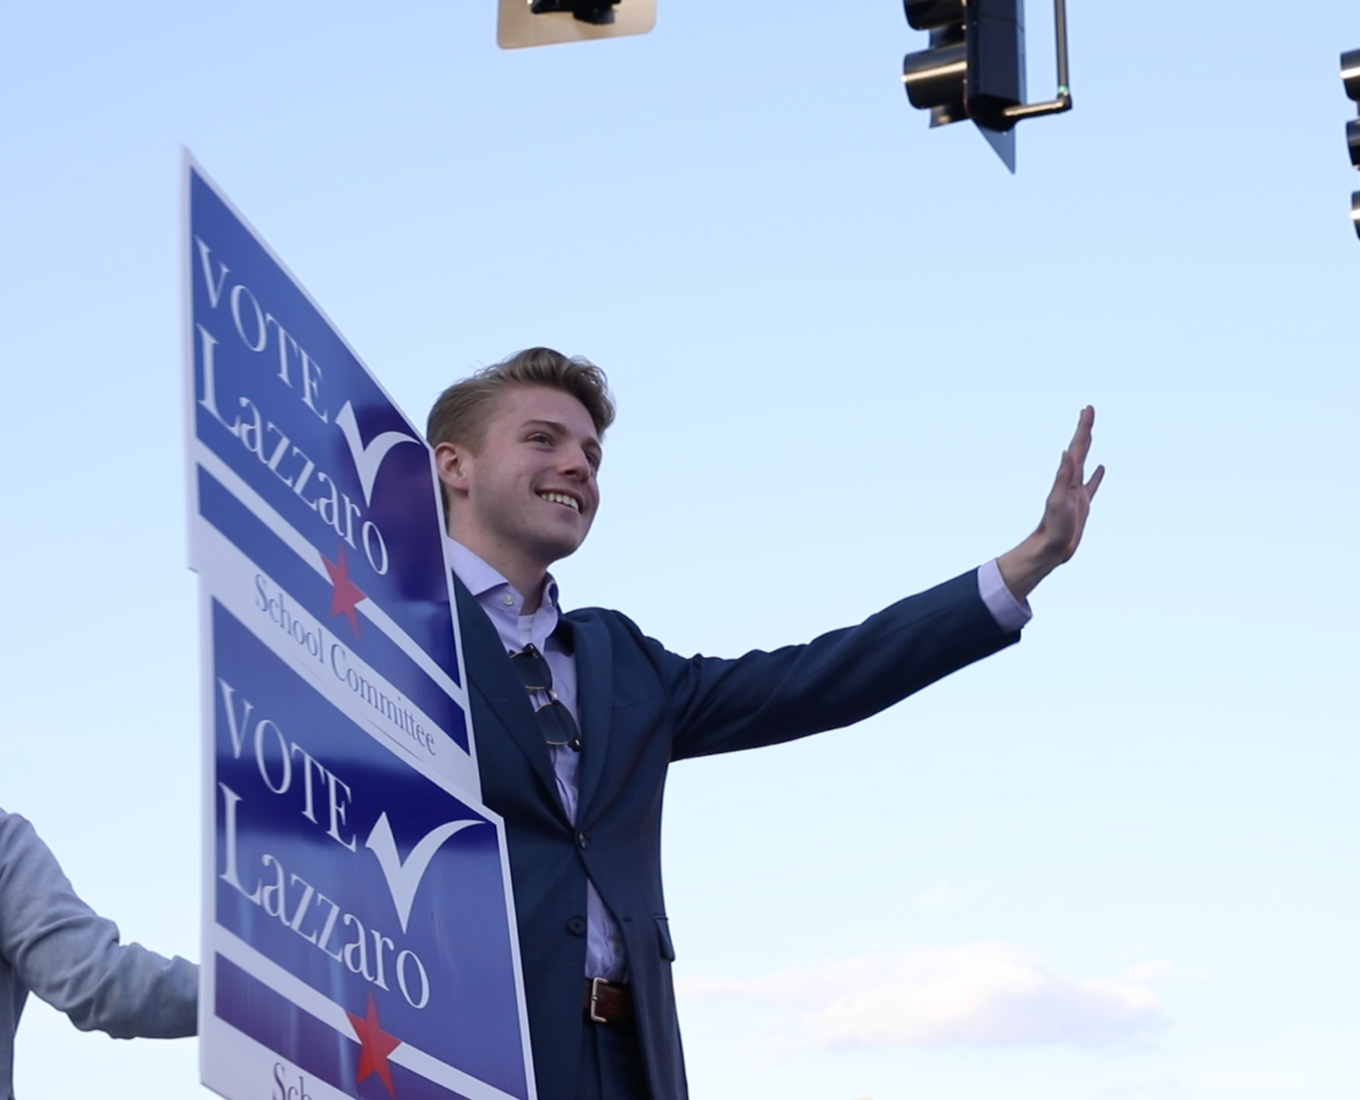 Nick Lazzaro waves to traffic and shows off his campaign sign